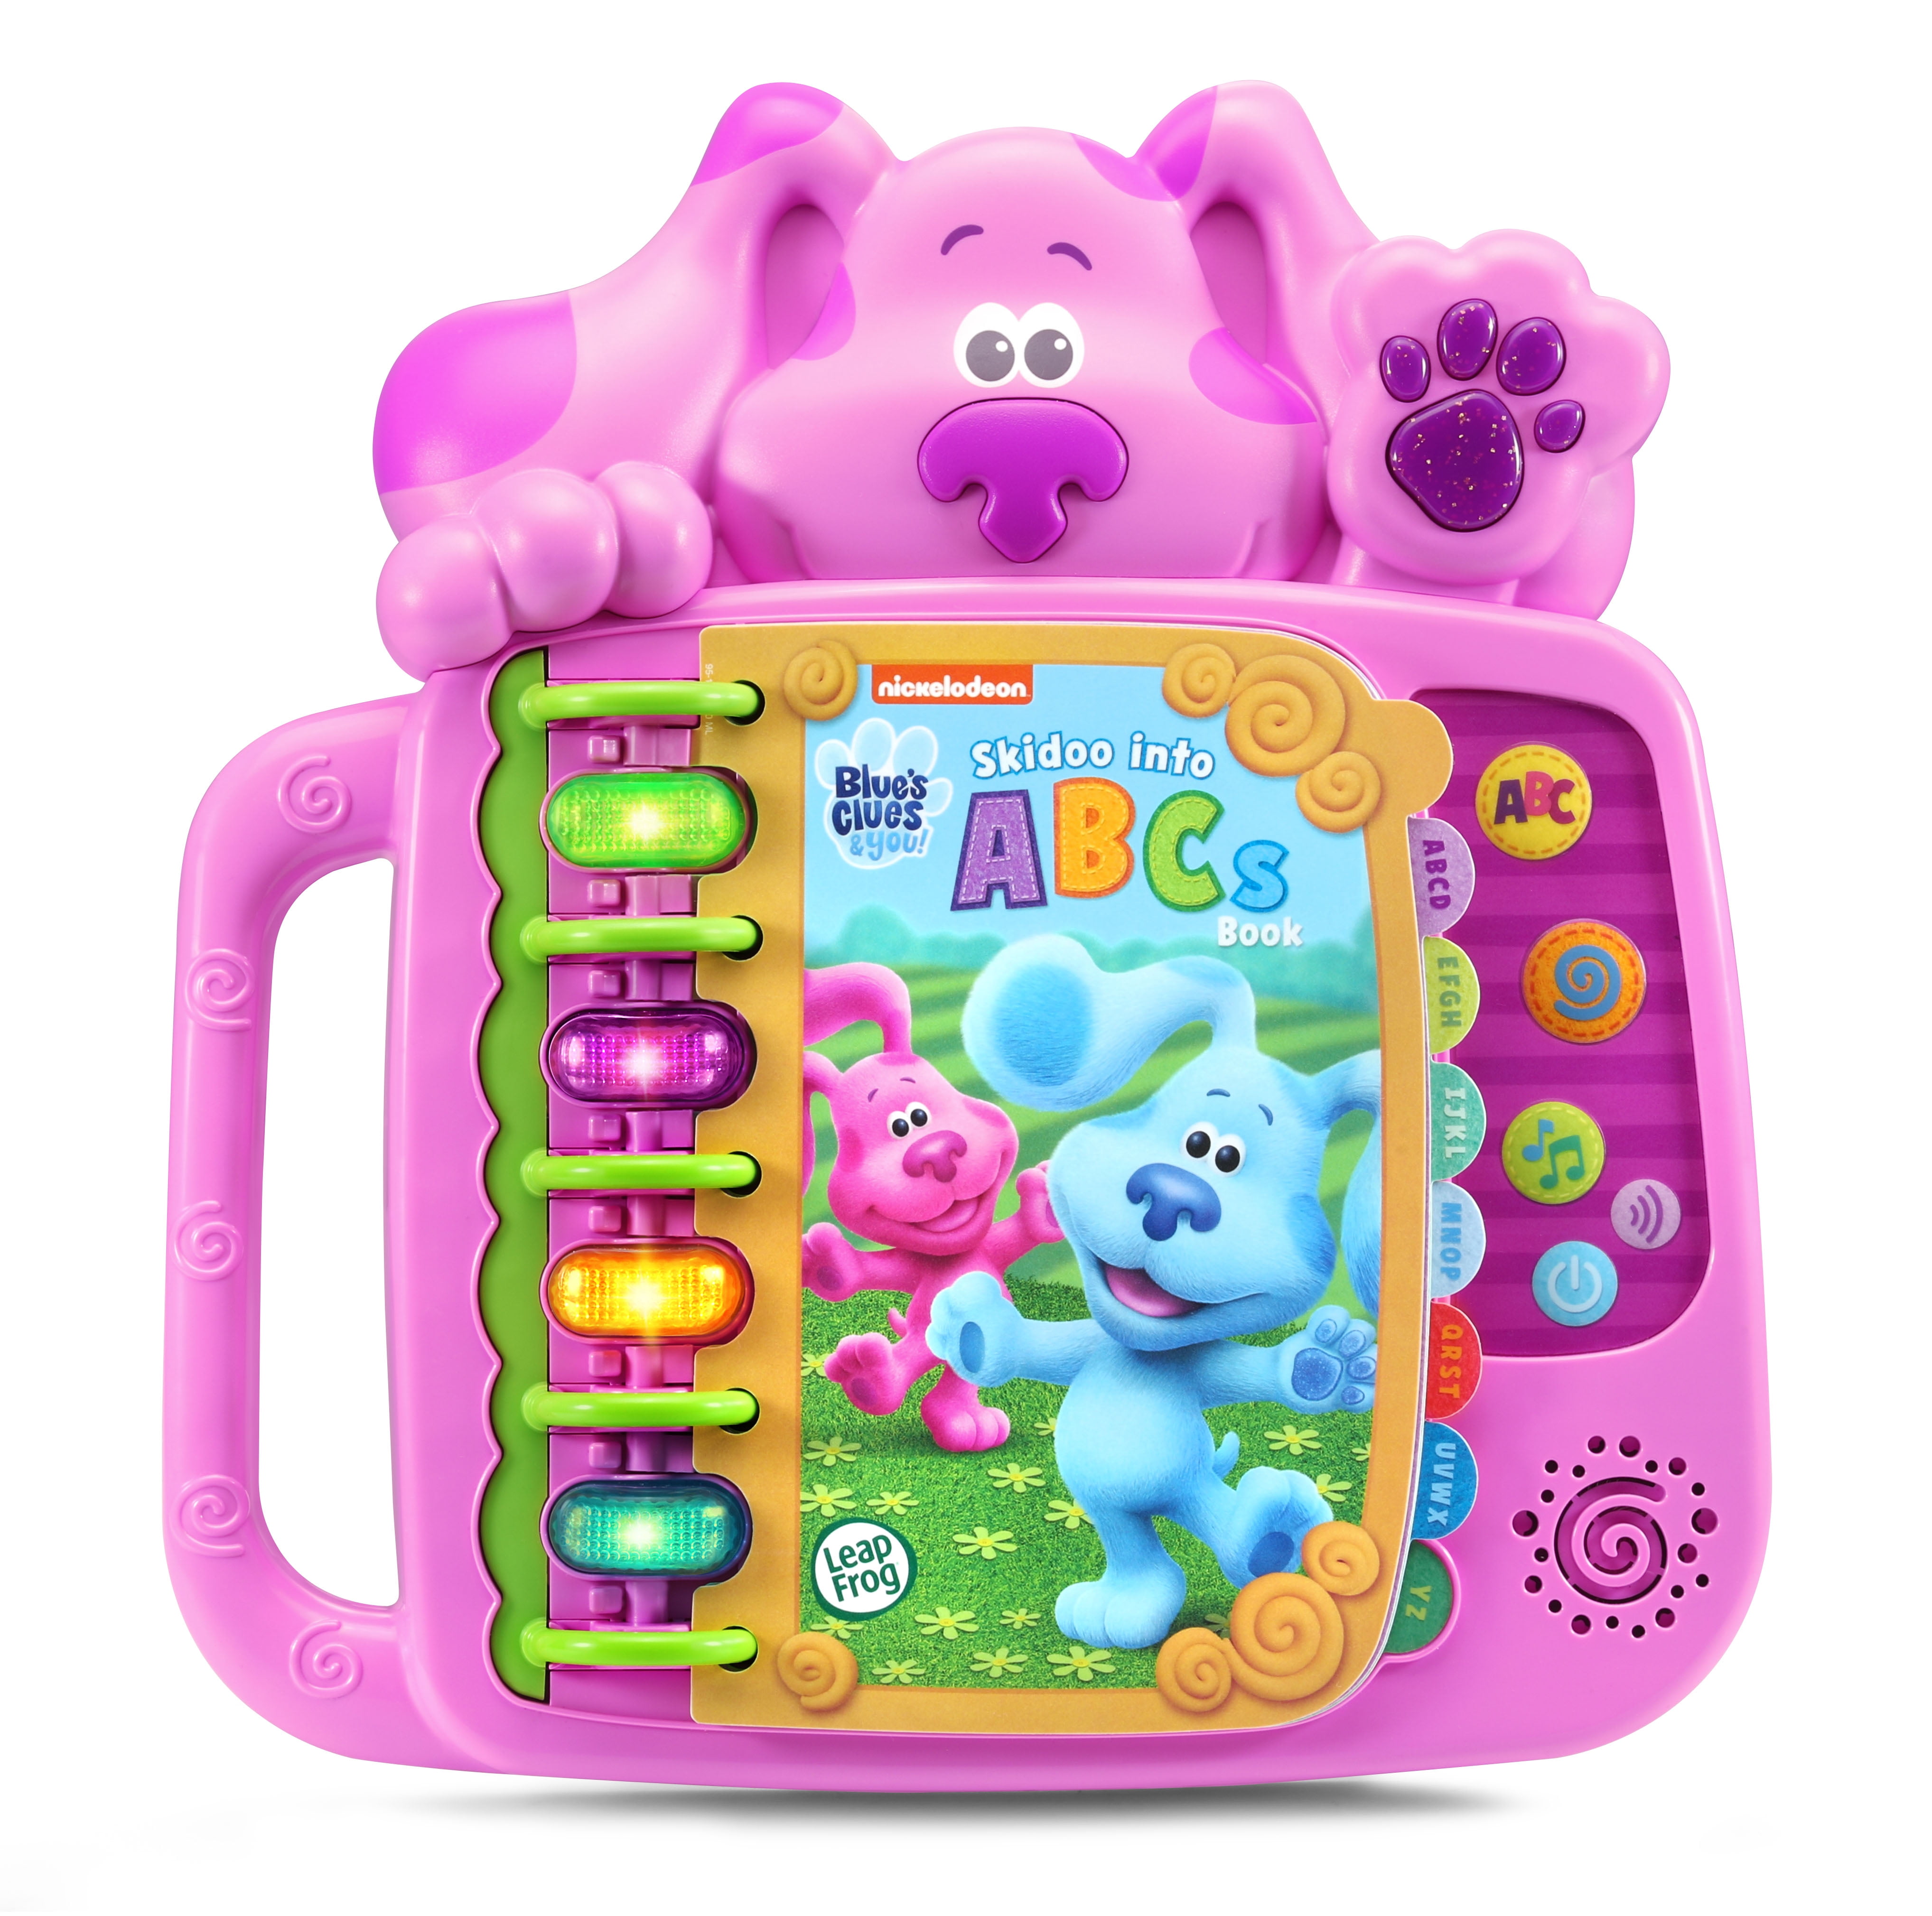 LeapFrog Blue's Clues and You SKIDOO Into ABCs Book Magenta for sale online 